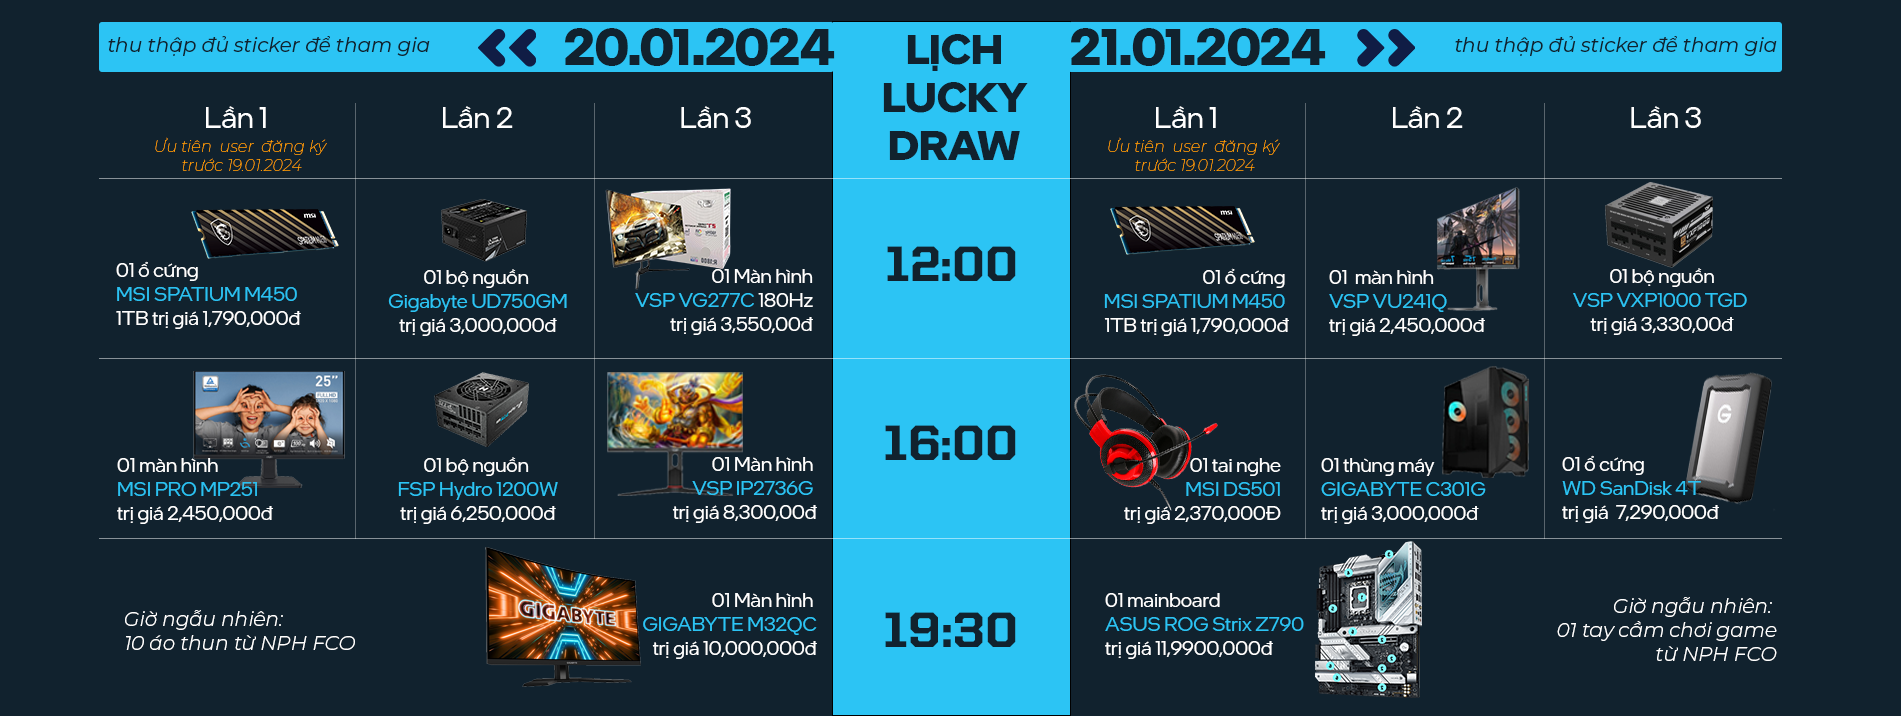 Lịch Lucky Draw